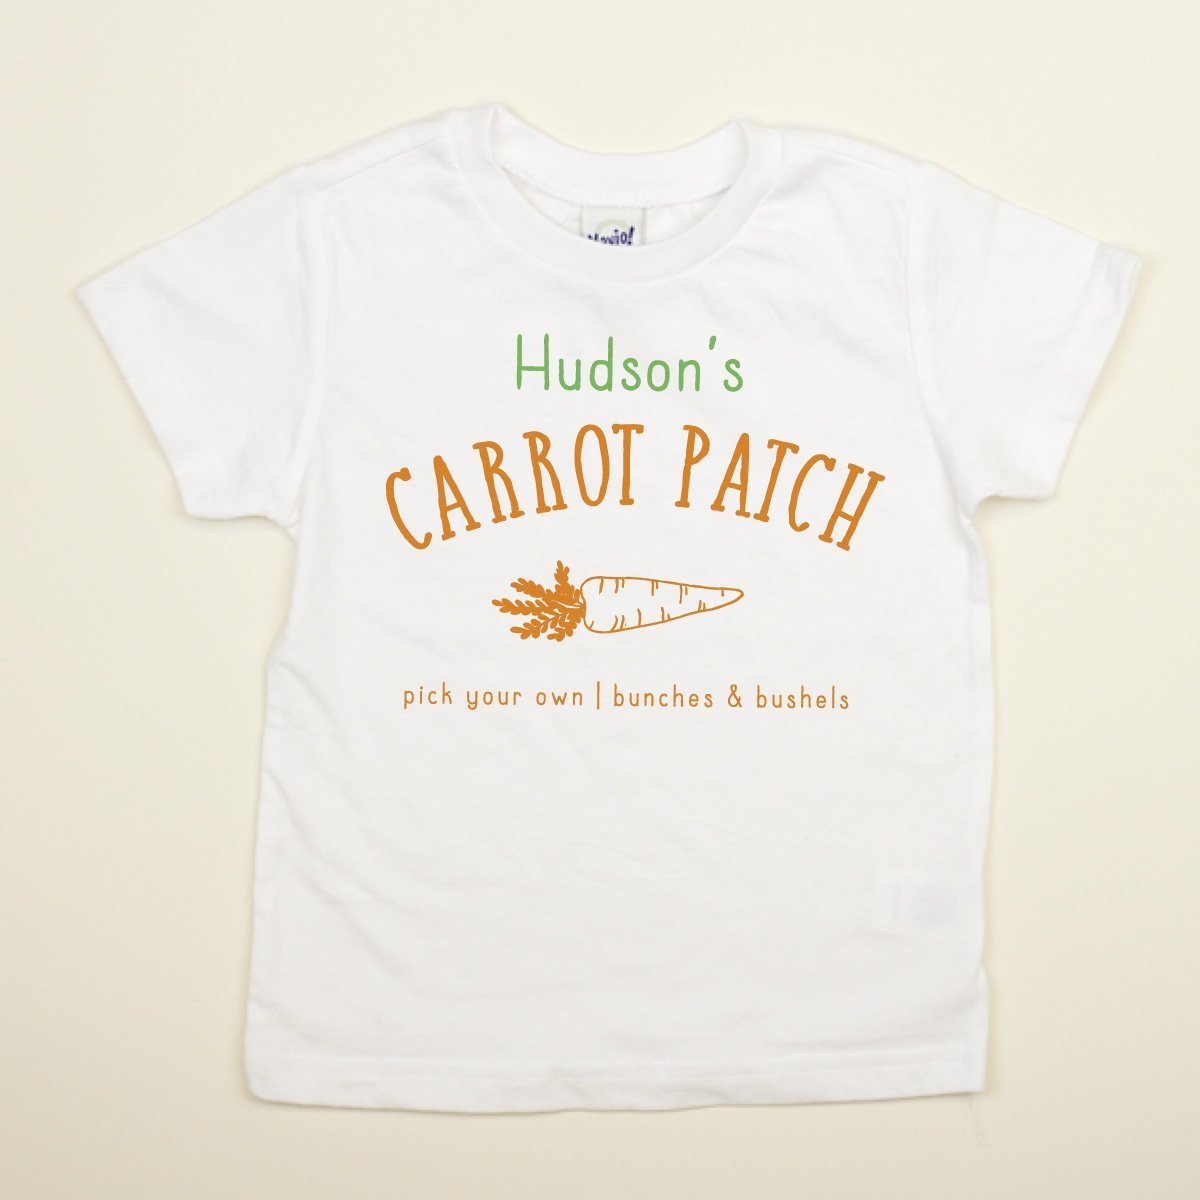 Cuddle Sleep Dream Personalized Carrot Patch Tshirt